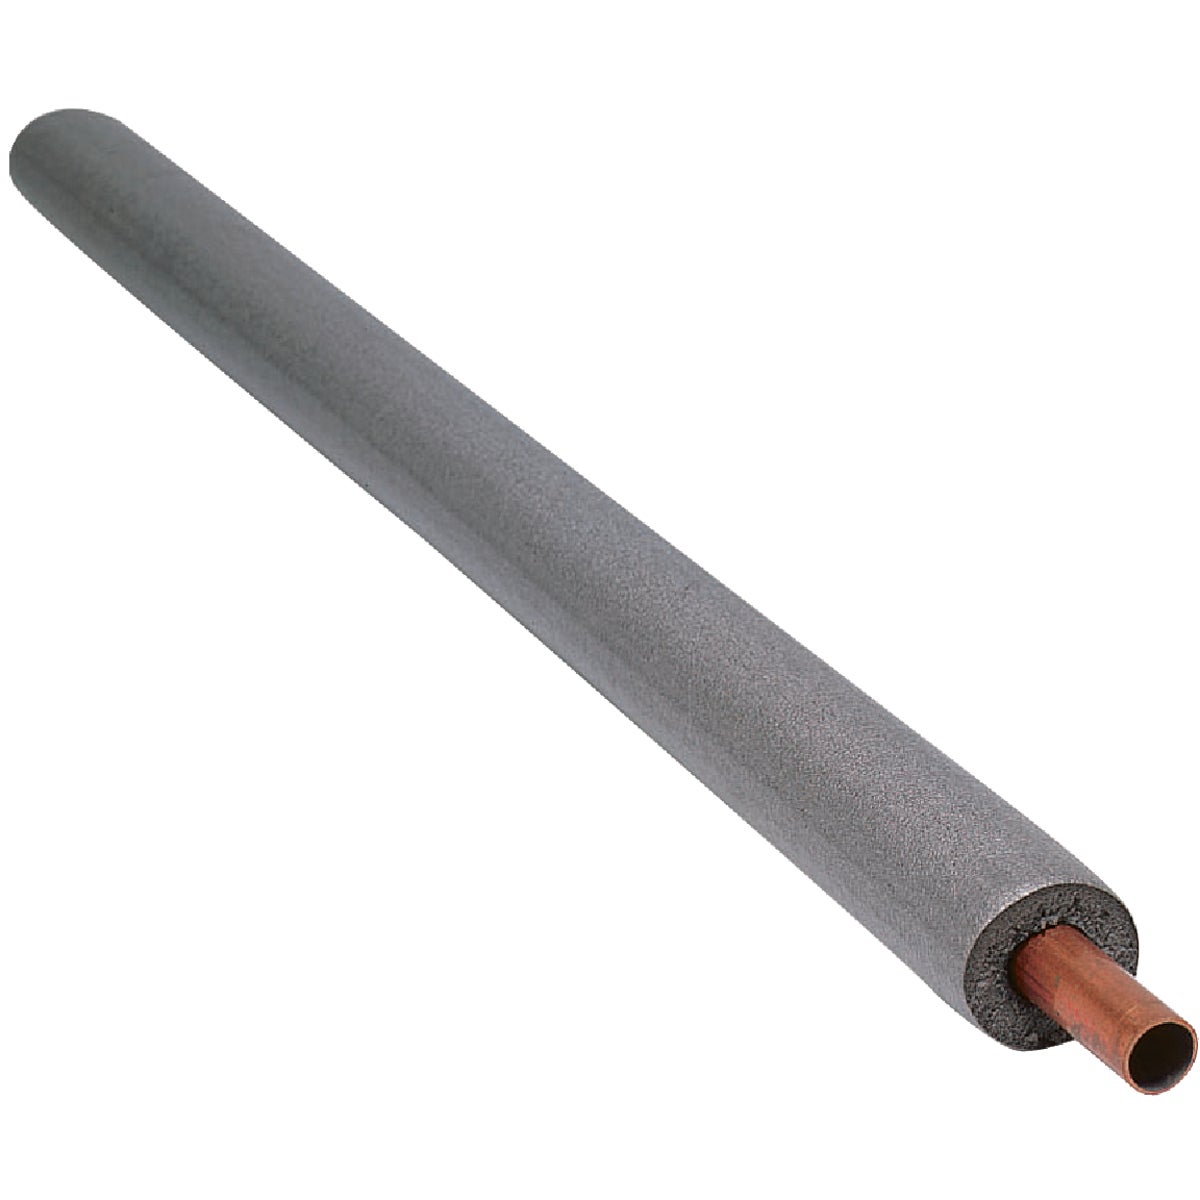 Tundra 1/2 In. Wall Semi-Slit Polyethylene Pipe Insulation Wrap, 1 In. x 6 Ft. Fits Pipe Size 1 In. Copper / 3/4 In. Iron